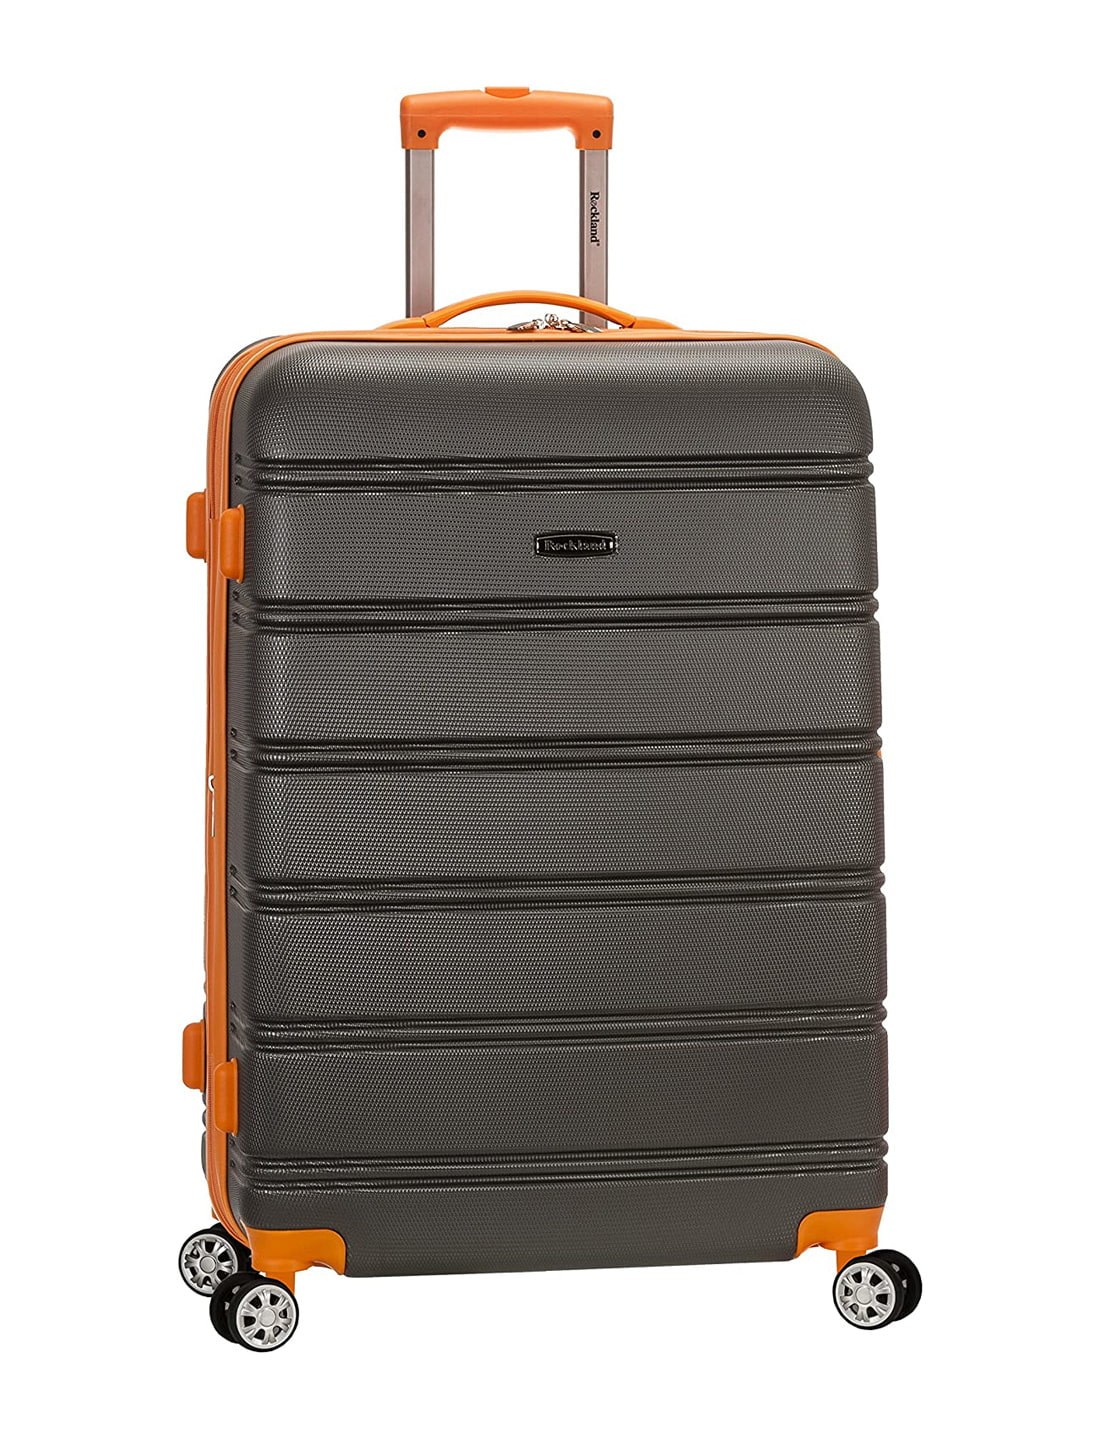 Lightweight and affordable checked baggage